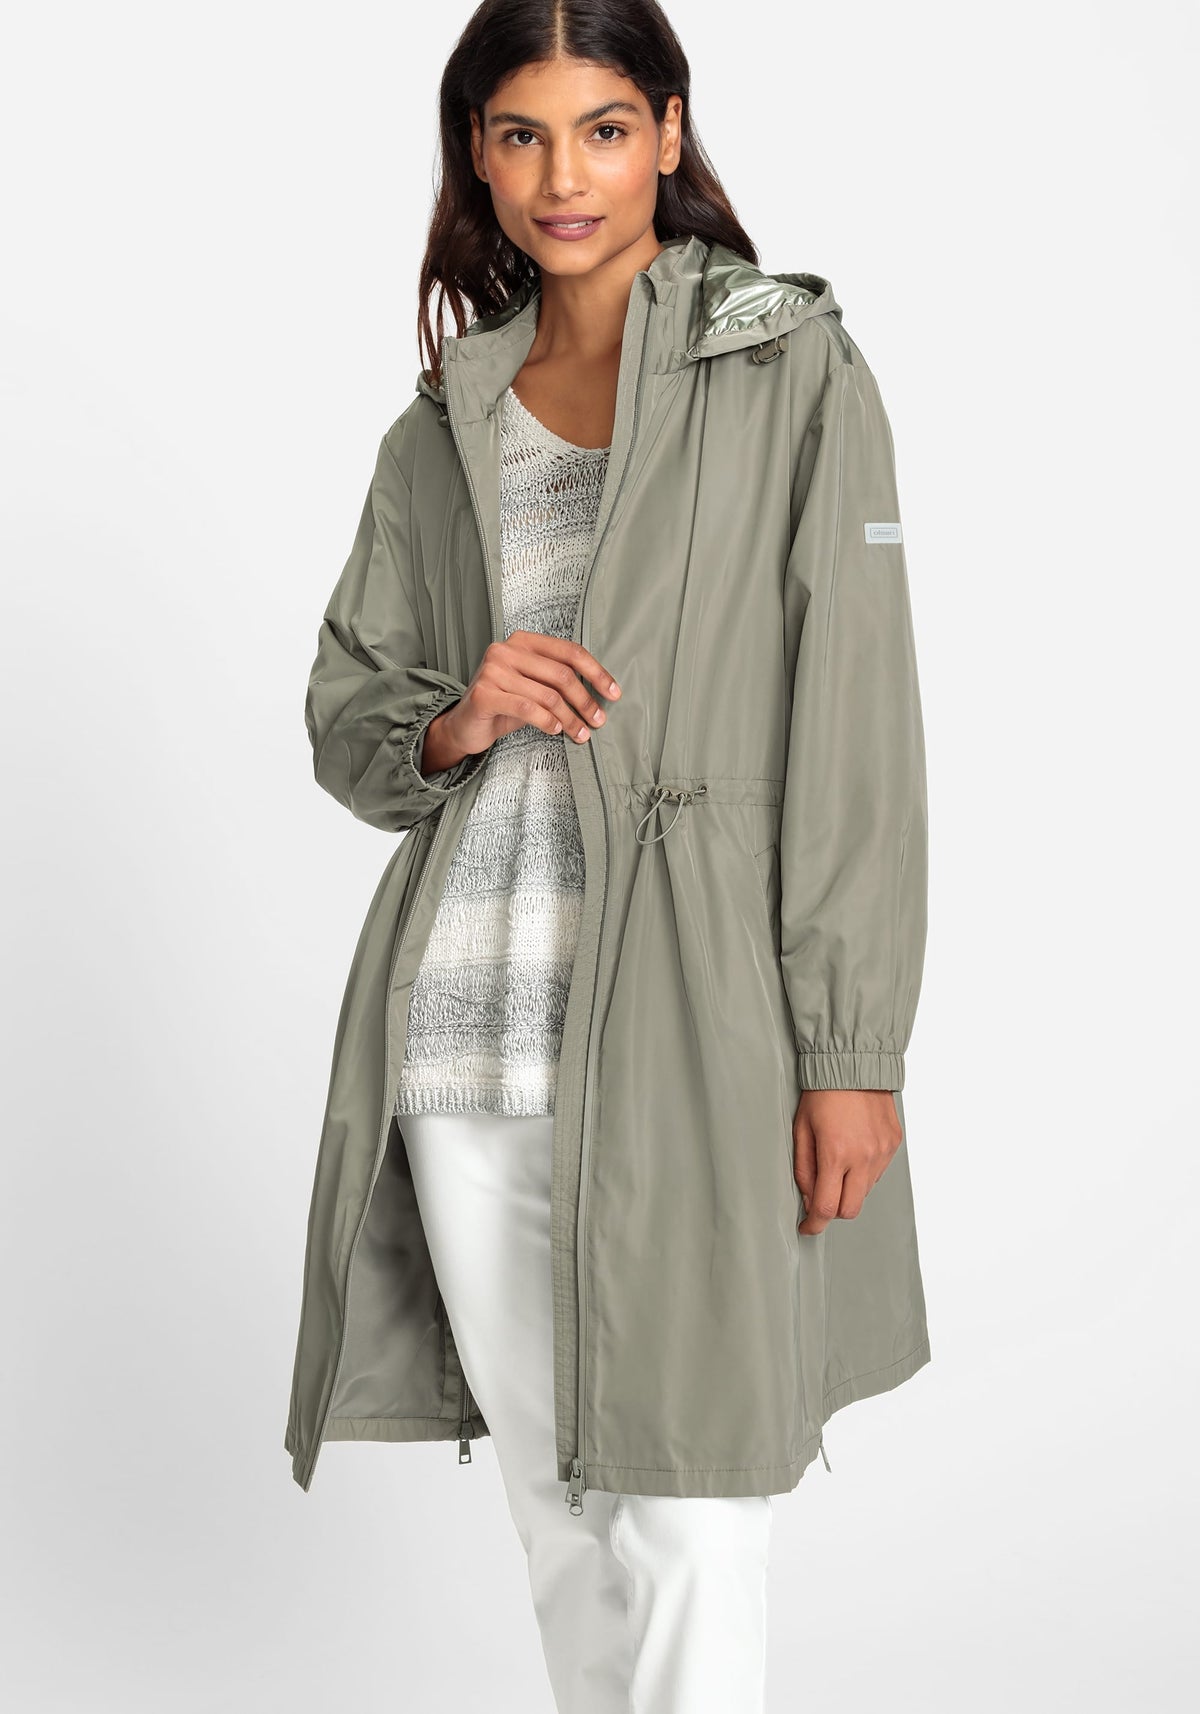 Anorak Jacket with Removable Hood